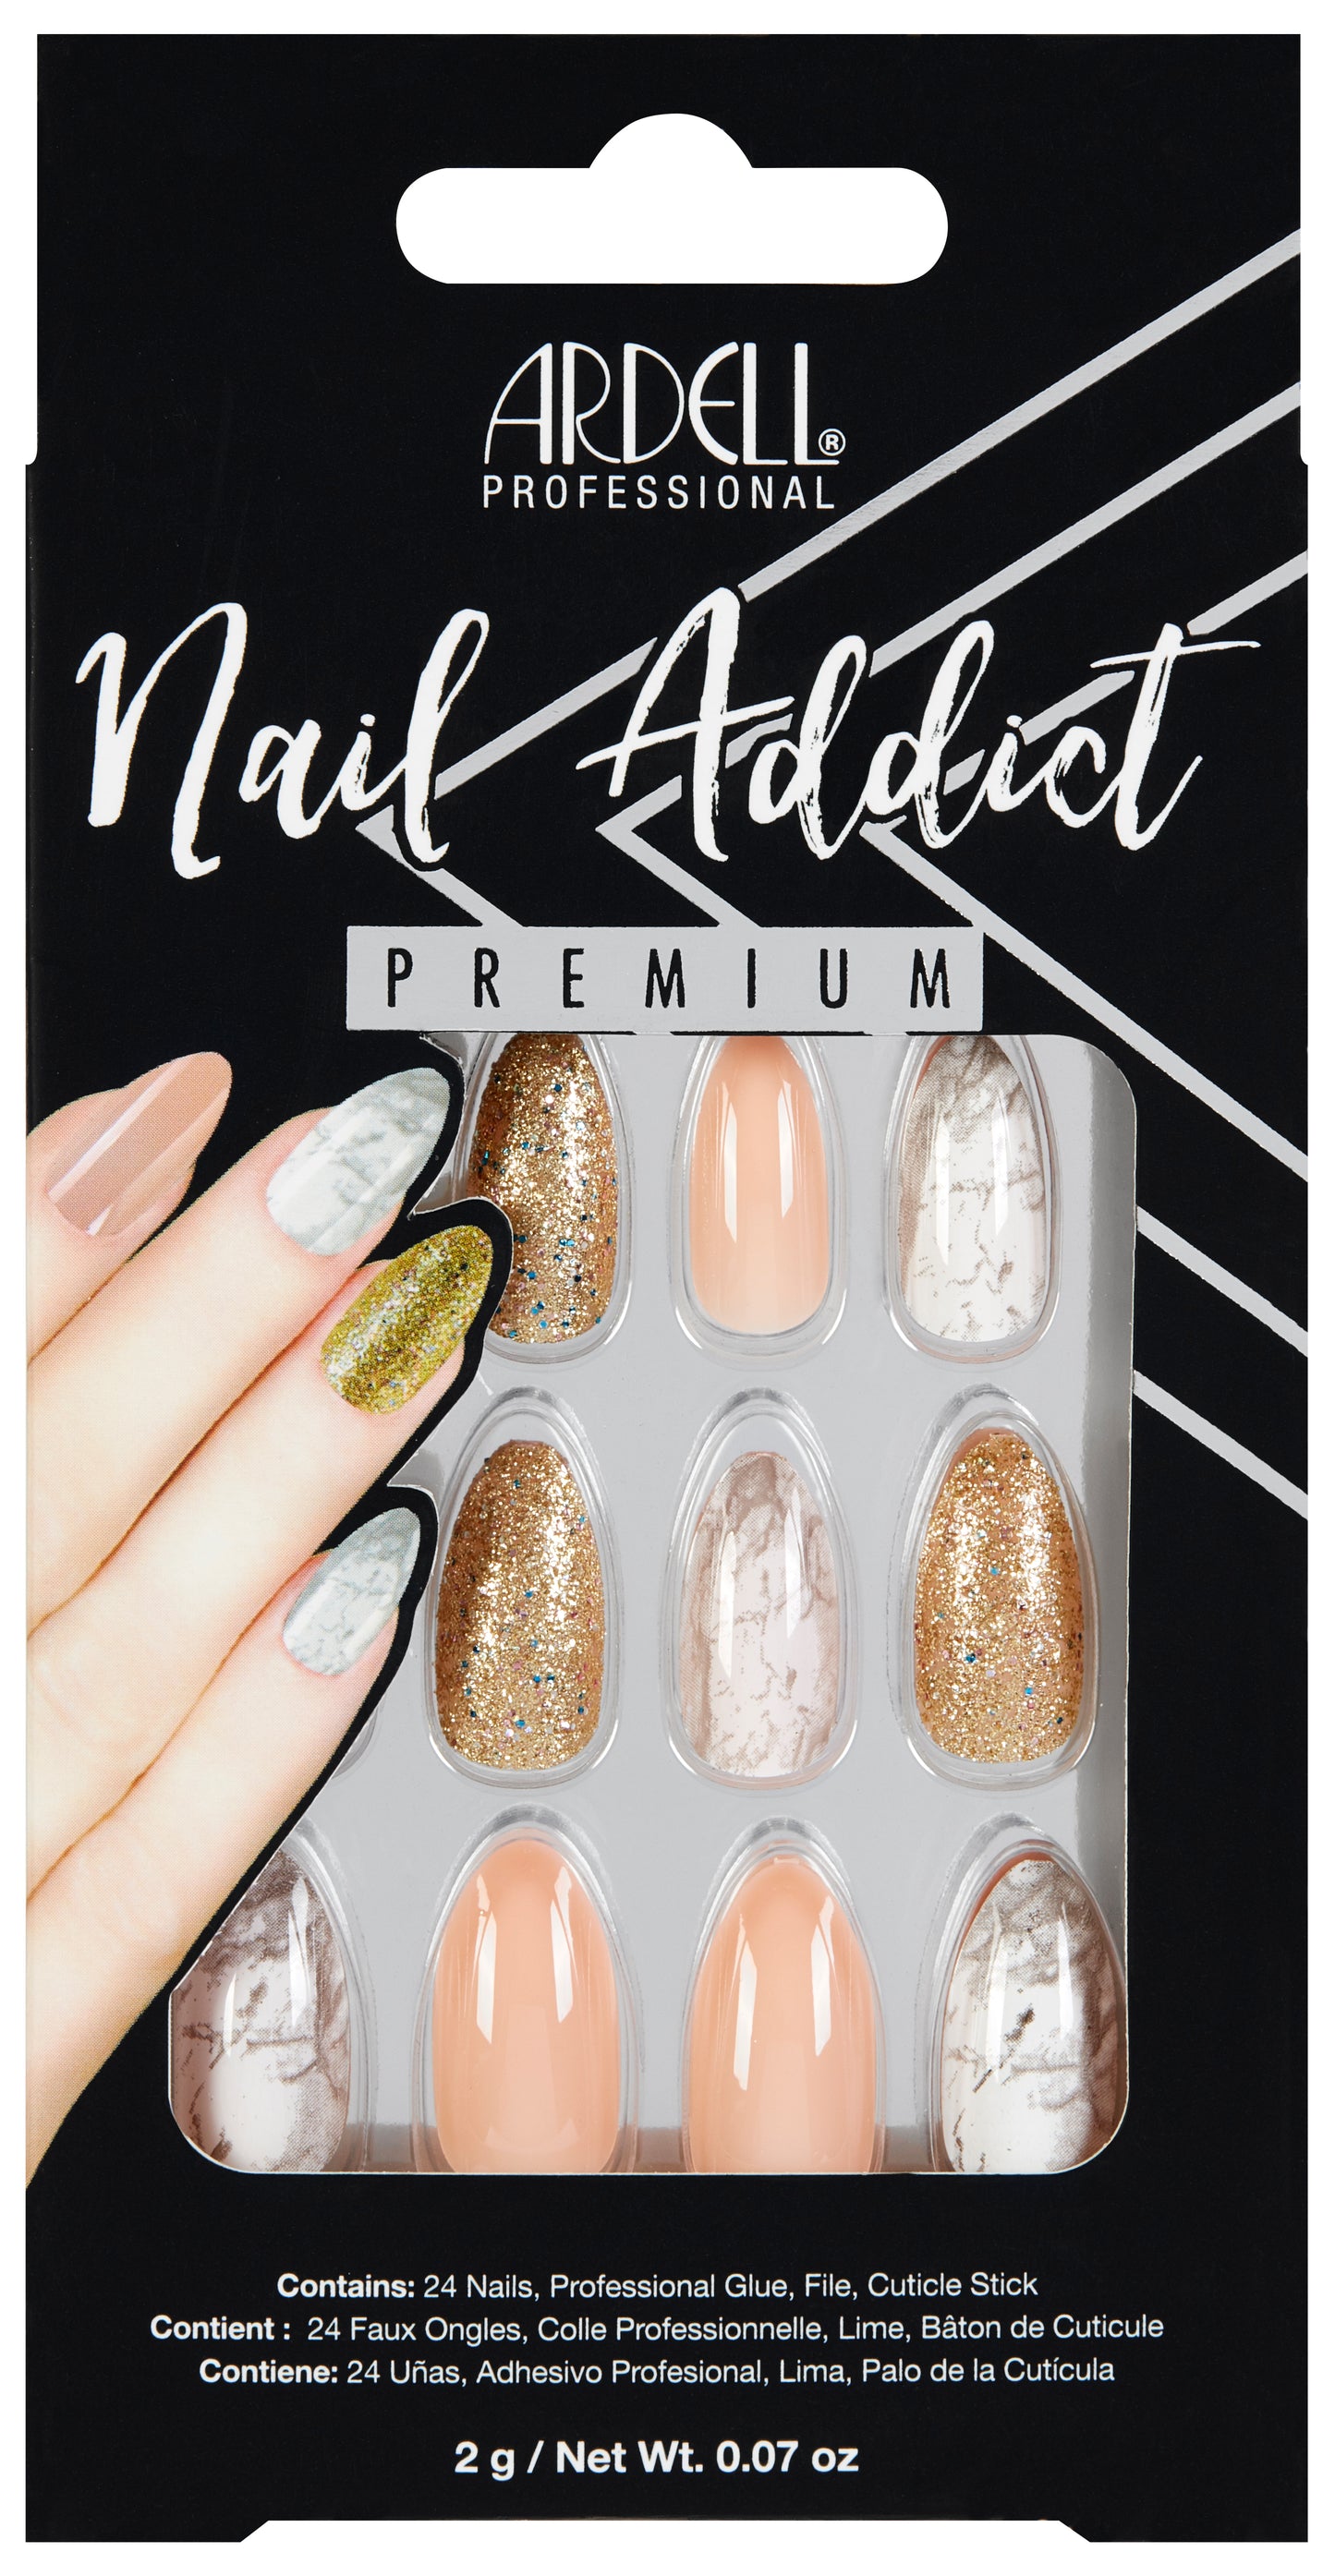 Load image into Gallery viewer, Ardell Nail Addict Premium Nails Pink Marble and Gold
